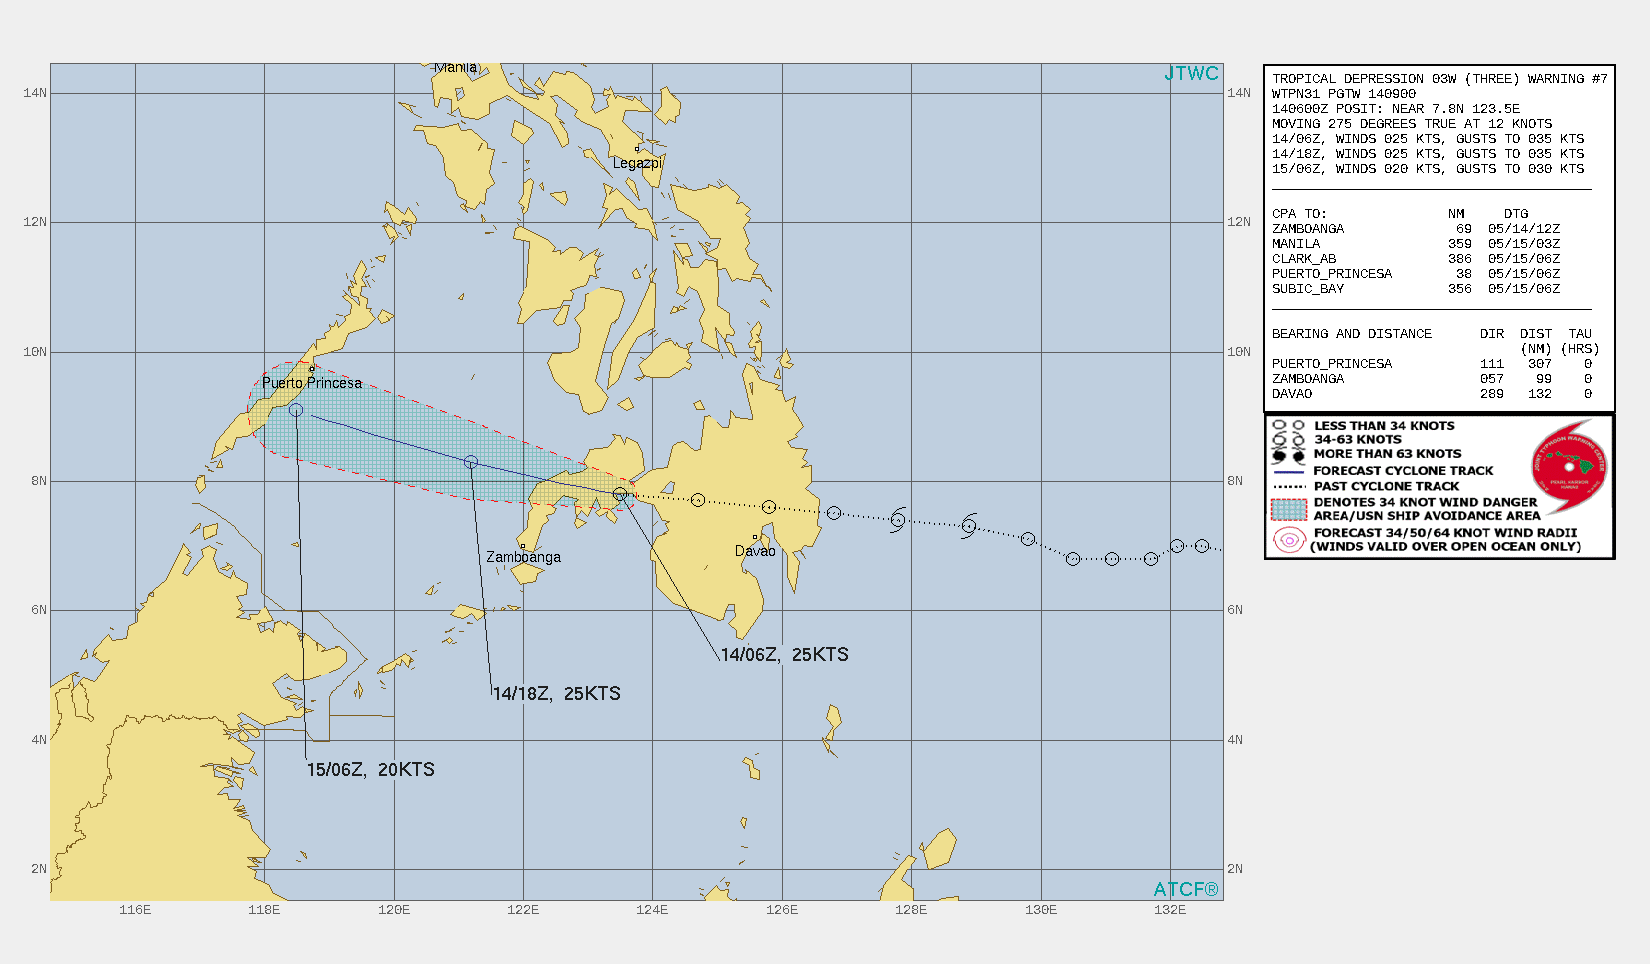 TD 03W. WARNING 7 ISSUED AT 14/09UTC.ENVIRONMENTAL ANALYSIS INDICATES MARGINAL CONDITIONS WITH MODERATE  WESTERLY VERTICAL WIND SHEAR AND WEAK OUTFLOW. ANIMATED  WATER VAPOR IMAGERY REVEALS SUBSIDENCE ASSOCIATED WITH AN UPPER- LEVEL TROUGH POSITIONED OVER THE CENTRAL PHILIPPINES EXTENDING  SOUTHWESTWARD NEAR PALAWAN ISLAND. TD 03W IS TRACKING WESTWARD ALONG  THE SOUTHERN PERIPHERY OF A LOW- TO MID-LEVEL SUBTROPICAL RIDGE  (STR) ENTRENCHED TO THE NORTH.TD 03W IS FORECAST TO TRACK WESTWARD TO WEST-NORTHWESTWARD  THROUGH THE FORECAST PERIOD UNDER THE STEERING INFLUENCE OF THE STR  POSITIONED TO THE NORTH.